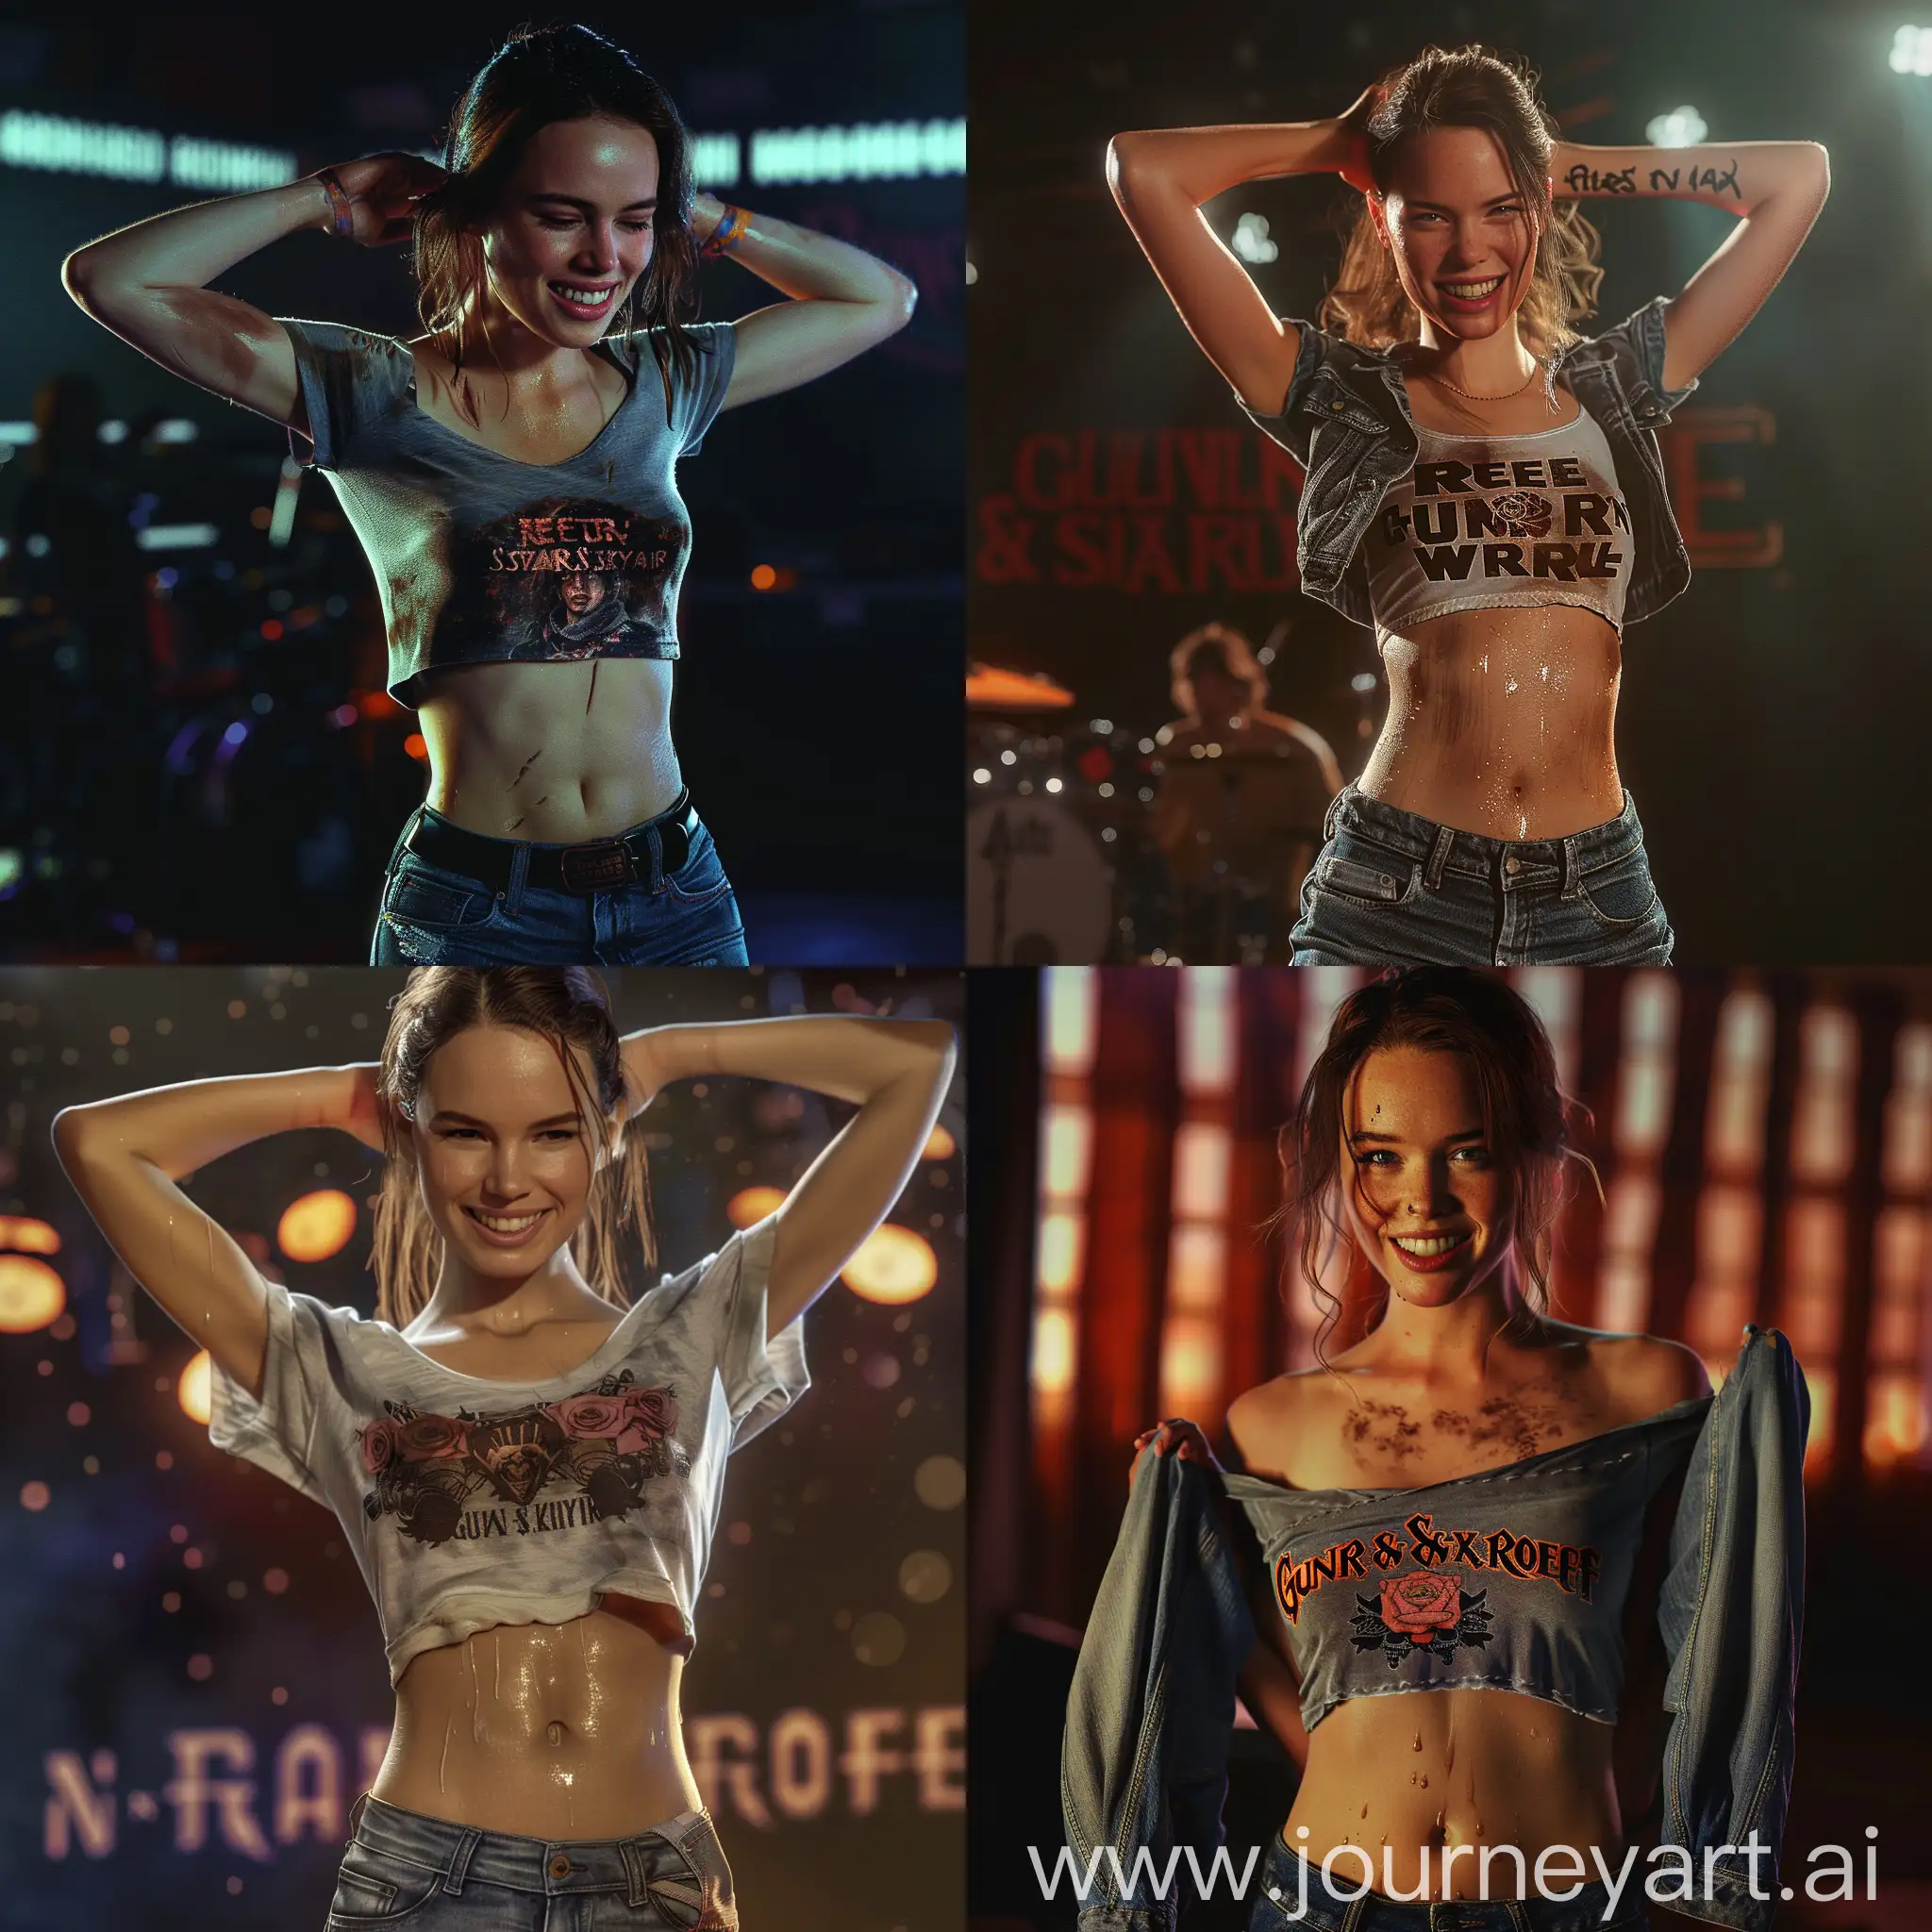 Hiper realistic image of Daisy Ridley with Rey Skywalker's face, Thin waist, jeans,  at a rock concert, with a Guns n' roses shirt, she with a mysterious look, sweaty face, stretching her chest, misterious smile, 4k resolution, cinematic image